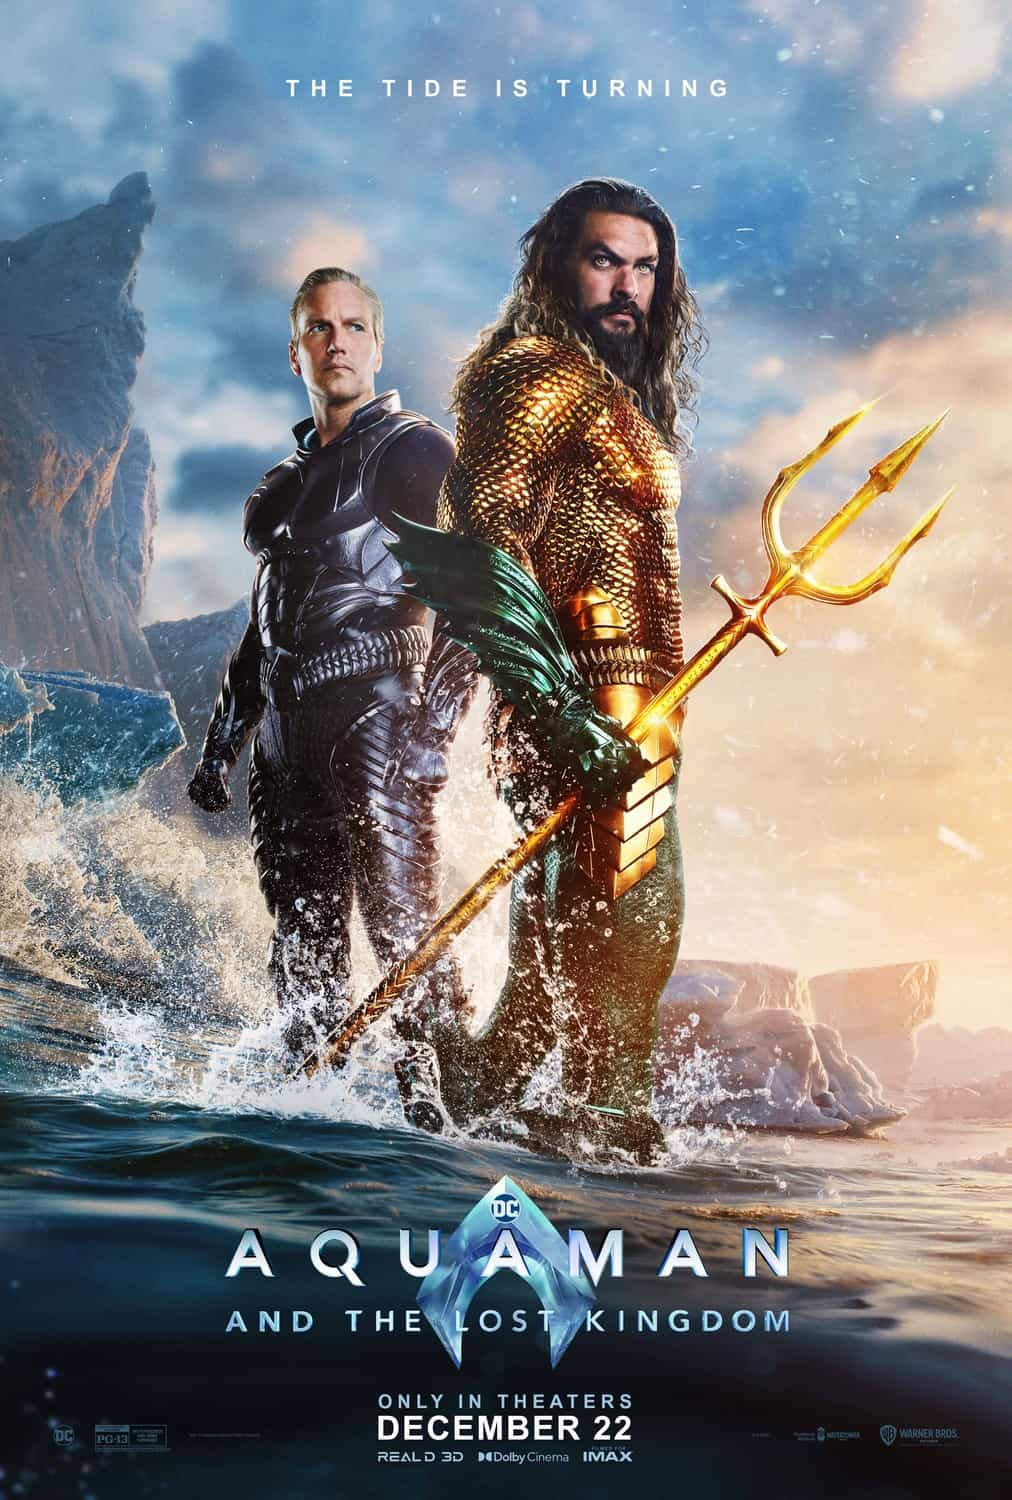 New poster has been released for Aquaman and the Lost Kingdom which stars Jason Momoa and Ben Affleck - movie UK release date 26th December 2023 #aquamanandthelostkingdom